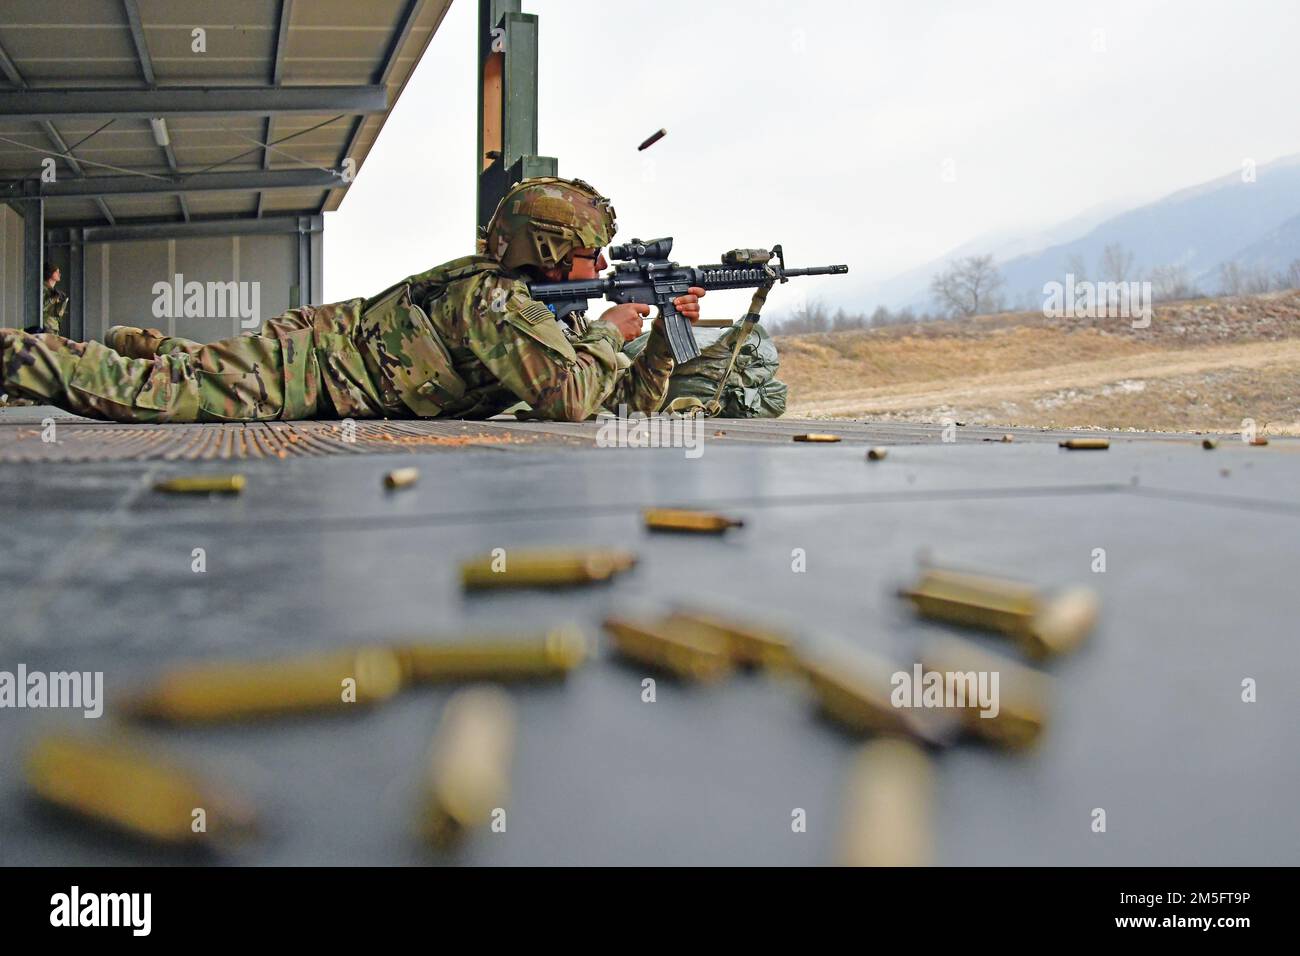 A U.S. Army Paratrooper, assigned to the 2nd Battalion, 503rd Infantry Regiment, 173rd Airborne Brigade, engages a pop-up targets with  an M4 carbine during marksmanship training at Cao Malnisio Range, Pordenone, Italy, March 15, 2022. The 173rd Airborne Brigade is the U.S. Army’s Contingency Response Force in Europe, providing rapidly deployable forces to United States European, African, and Central Command areas of responsibility. Stock Photo